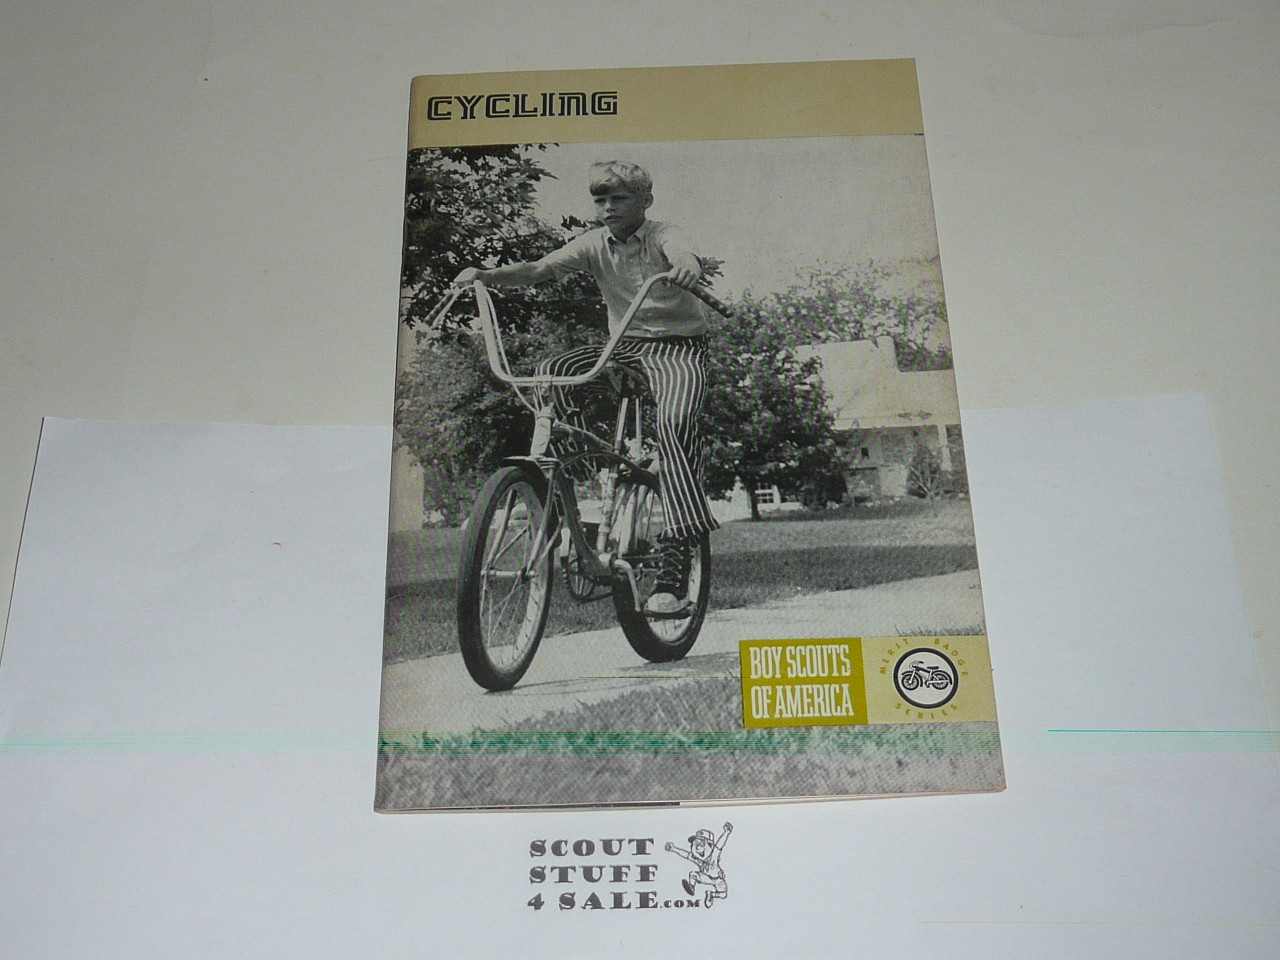 Cycling Merit Badge Pamphlet, Type 8, Green Band Cover, 12-72 Printing